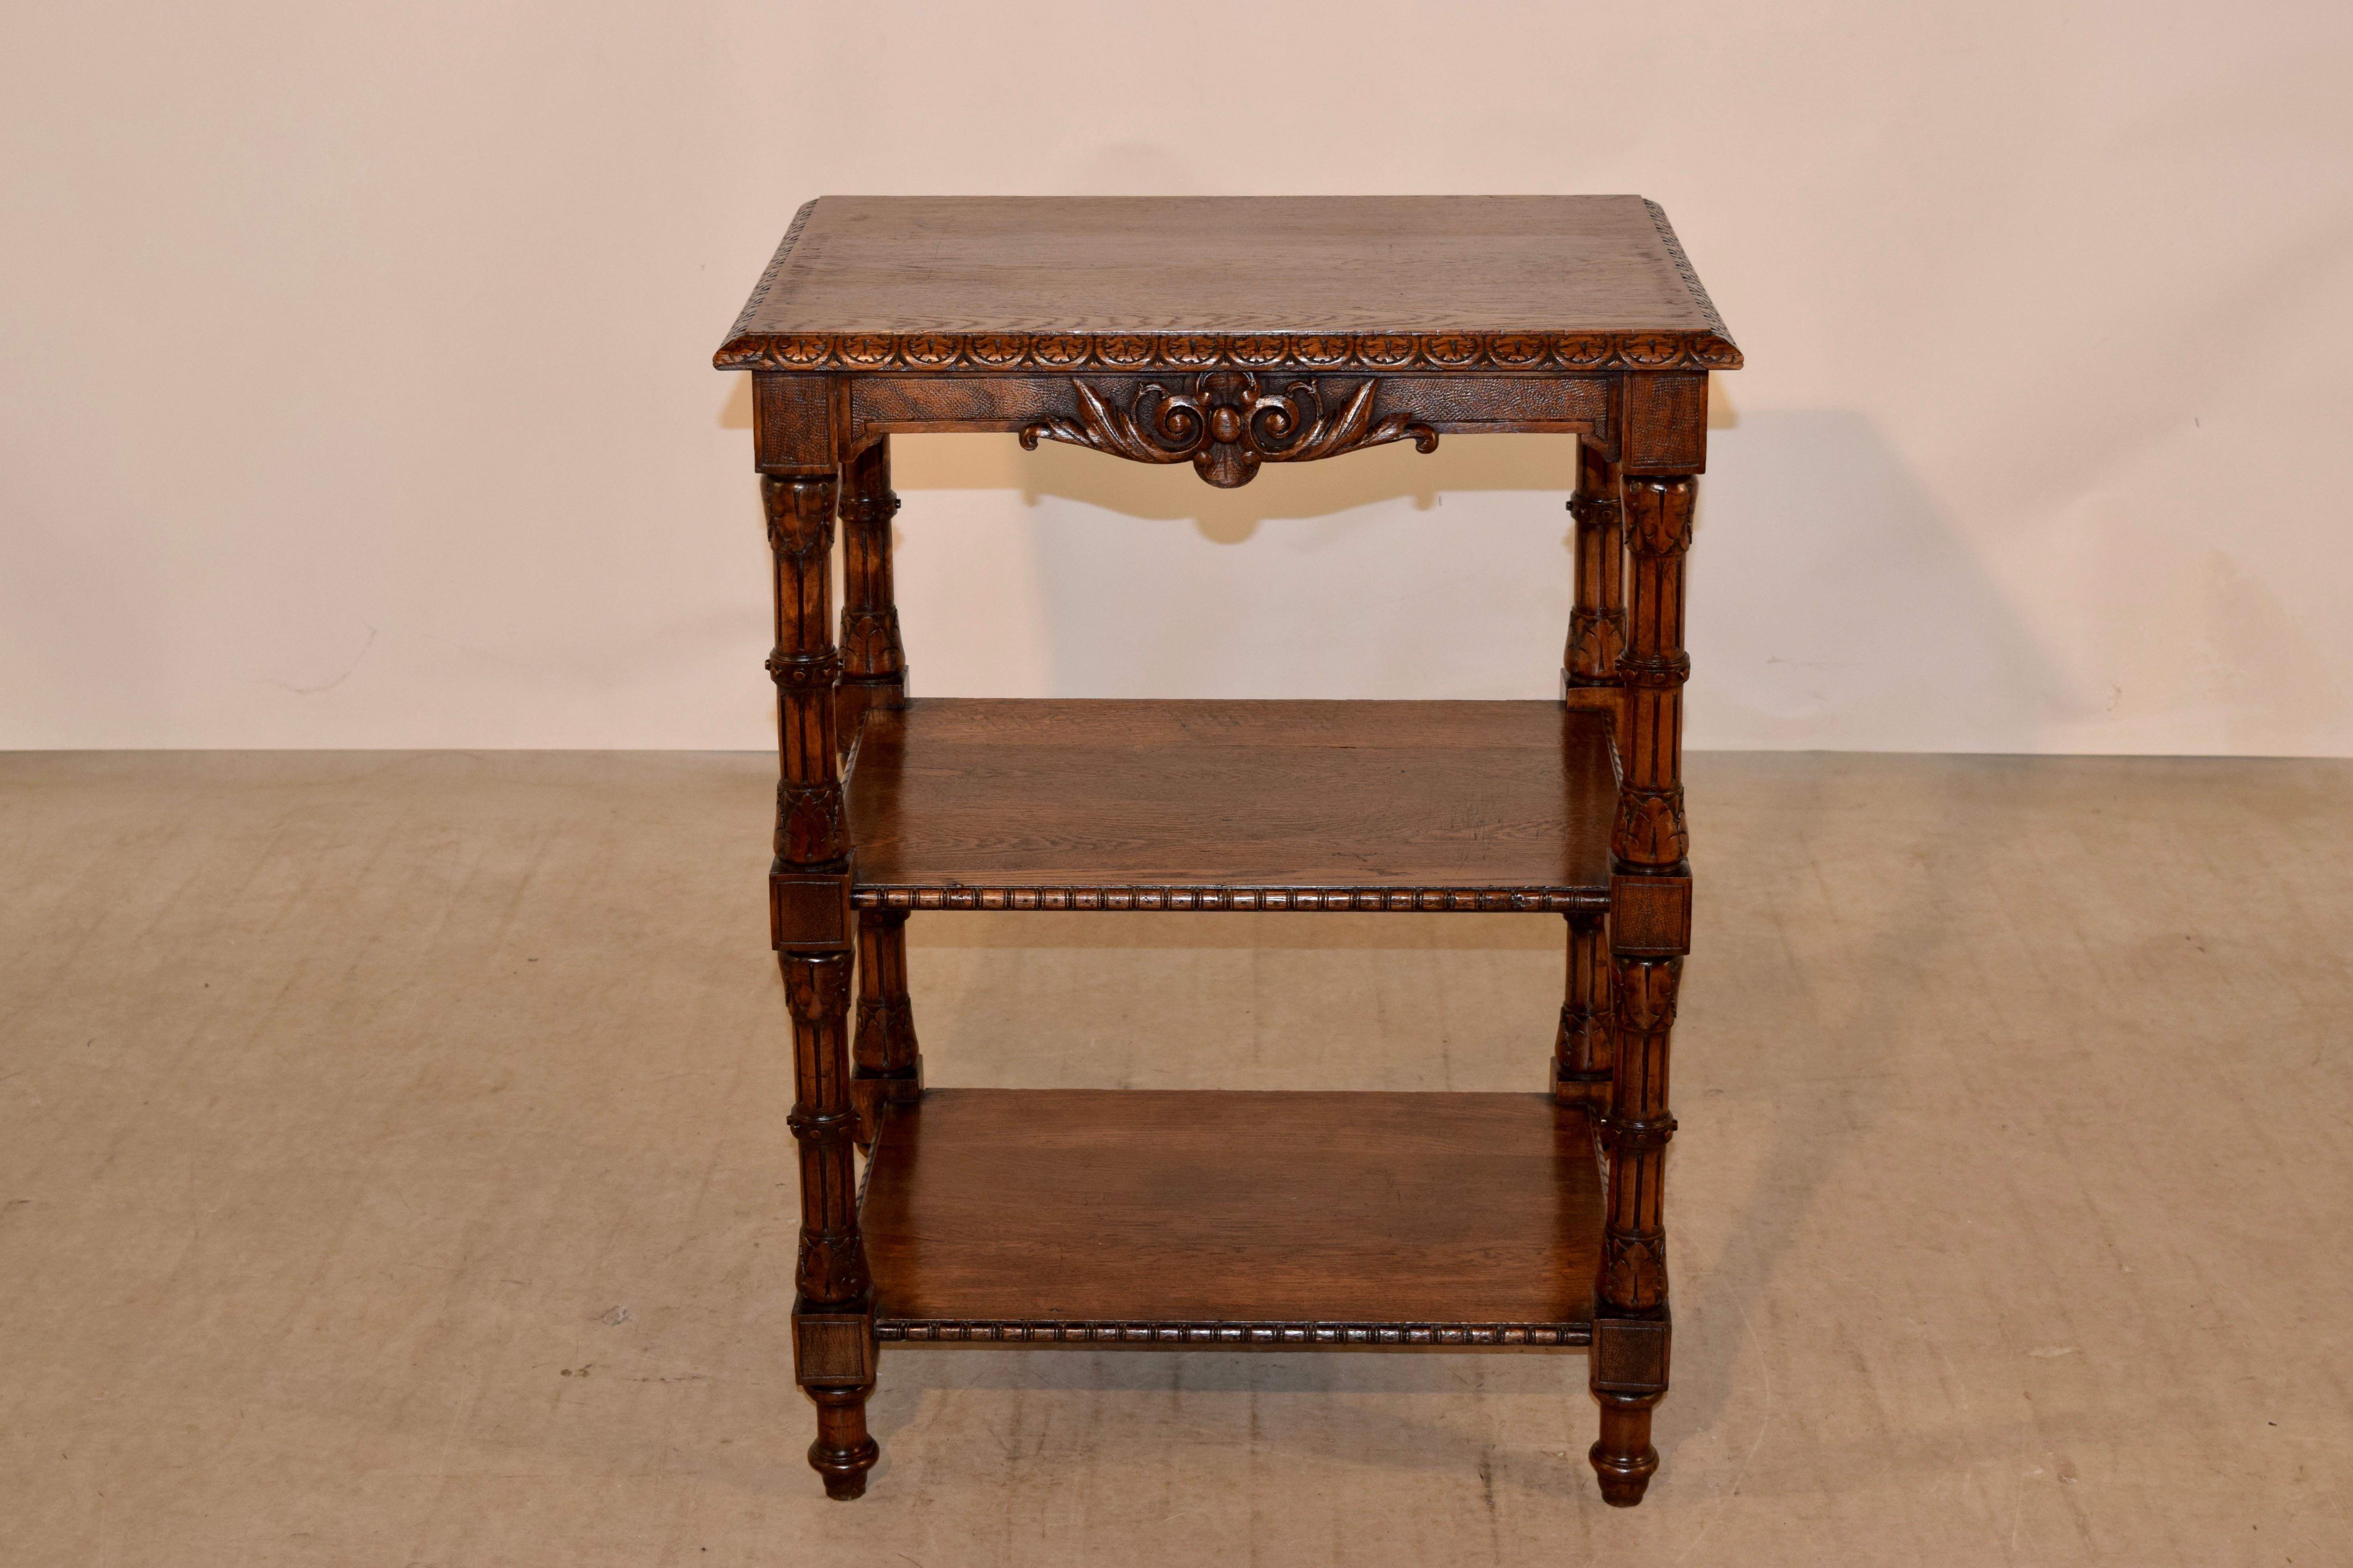 19th century French shelf with a beveled and carved decorated edge around the top, following down to simple molded aprons with lovely hand carved decorations and hand-turned and carved legs, which end in turned feet. There are two lower shelves,